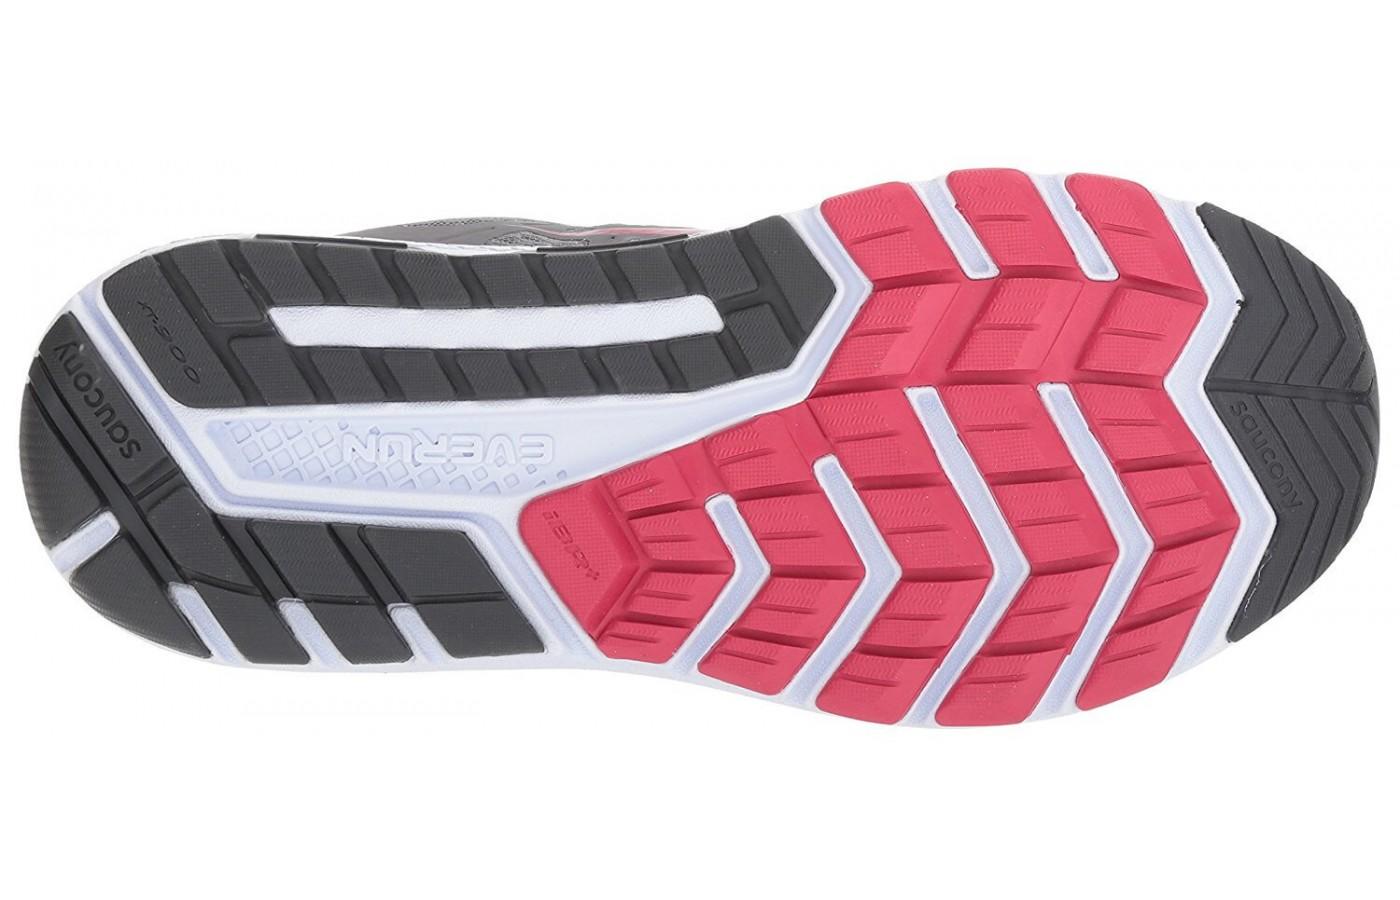 The Saucony Echelon 6's outsole has good ground contact and flexibility